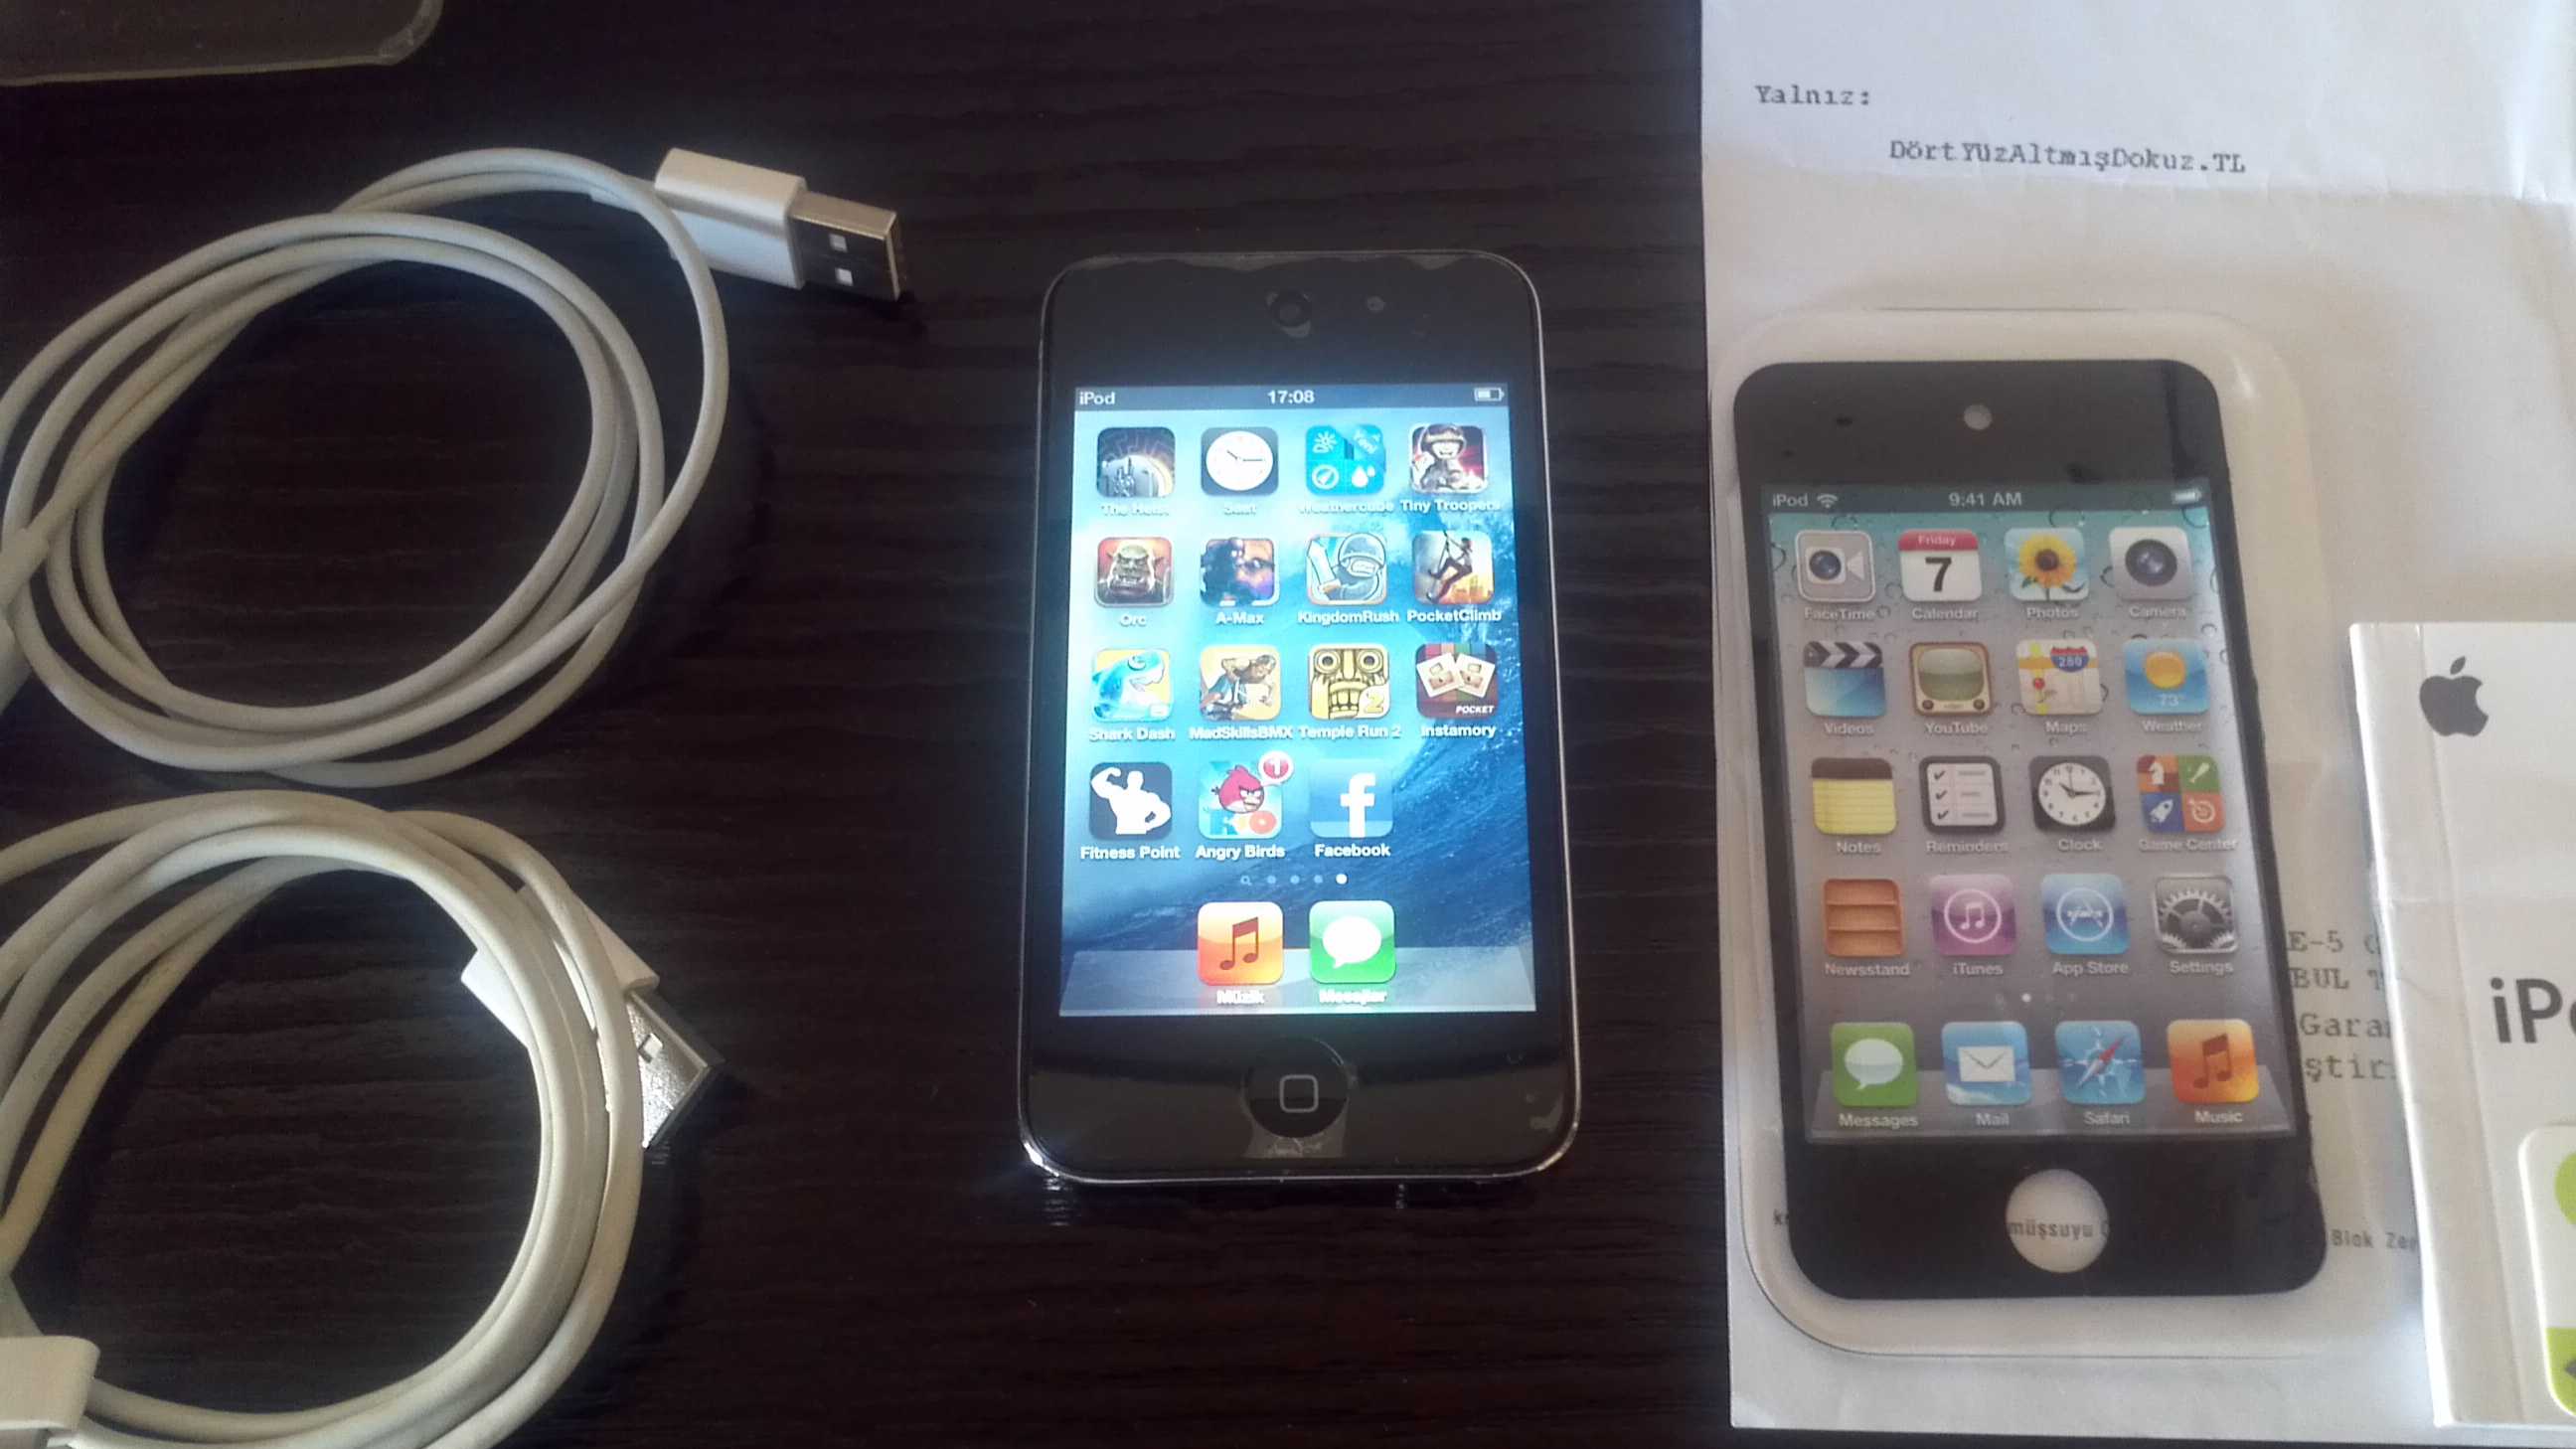 Apple ipod touch 4 8gb